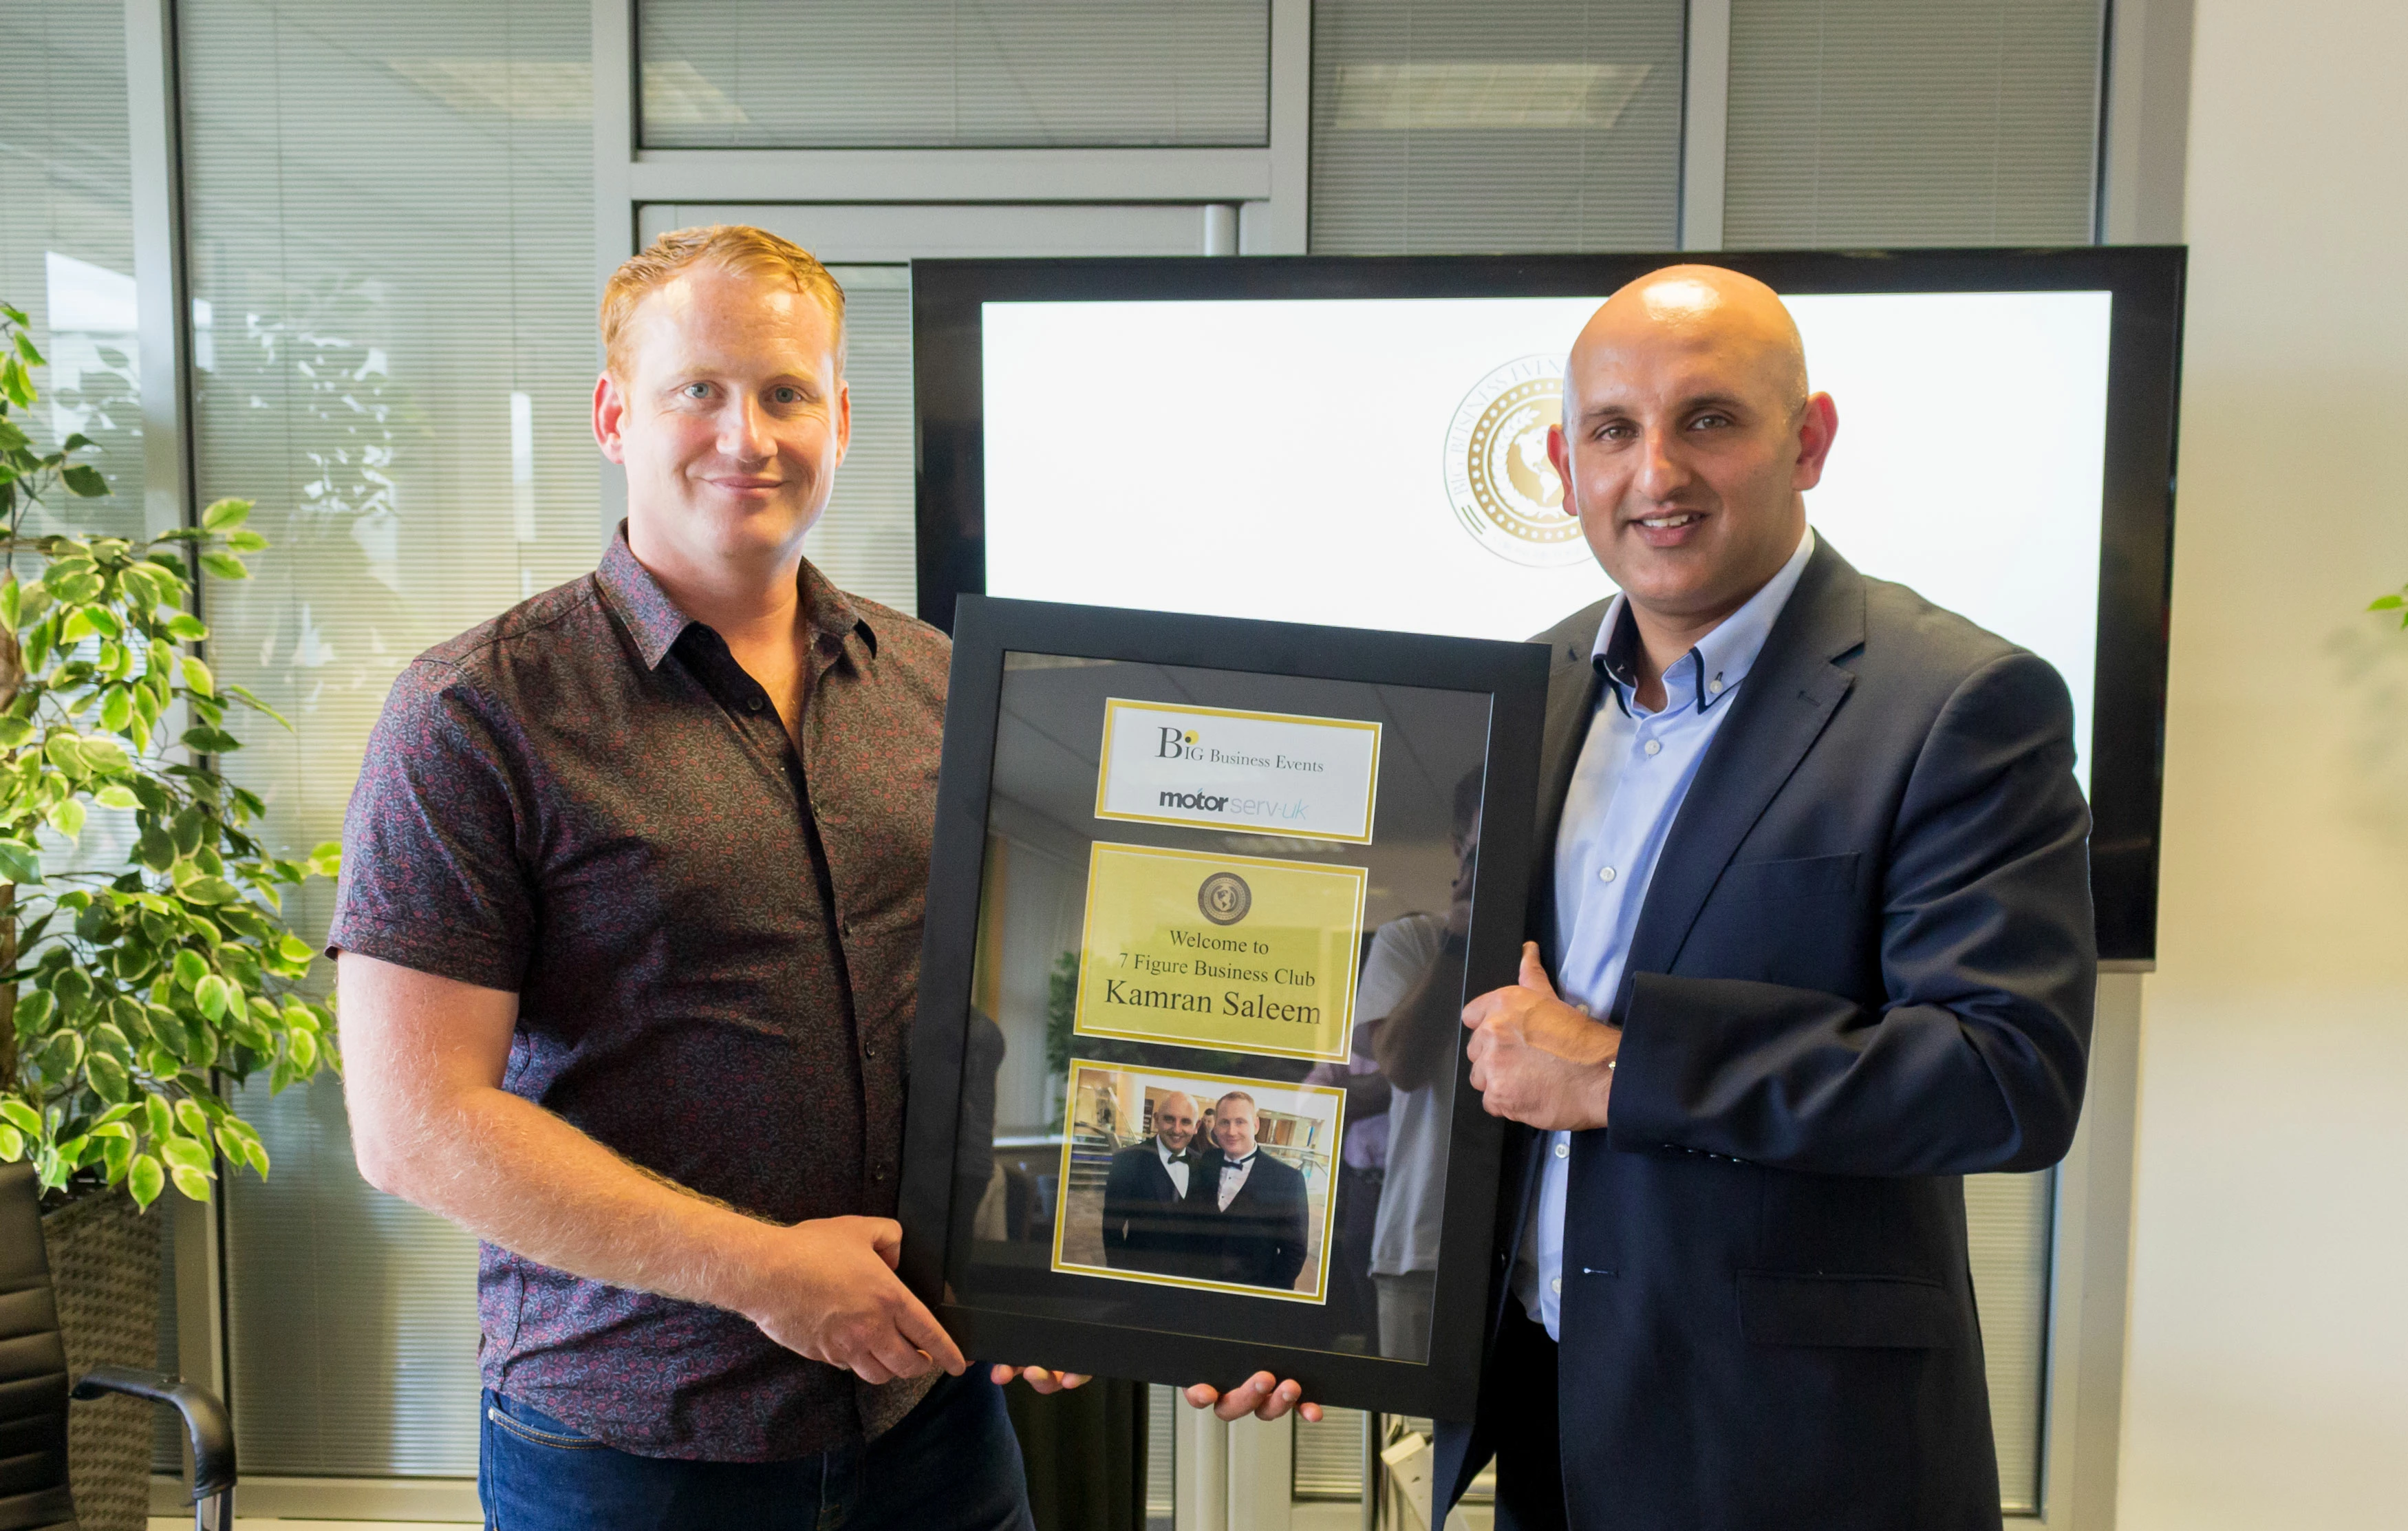 Owner of MotorServ UK, Kamran Saleem, is pictured receiving his ‘7 Figure Business Club’ certificate from Big Business Events Founder and Forbes Coach, Adam Stott.